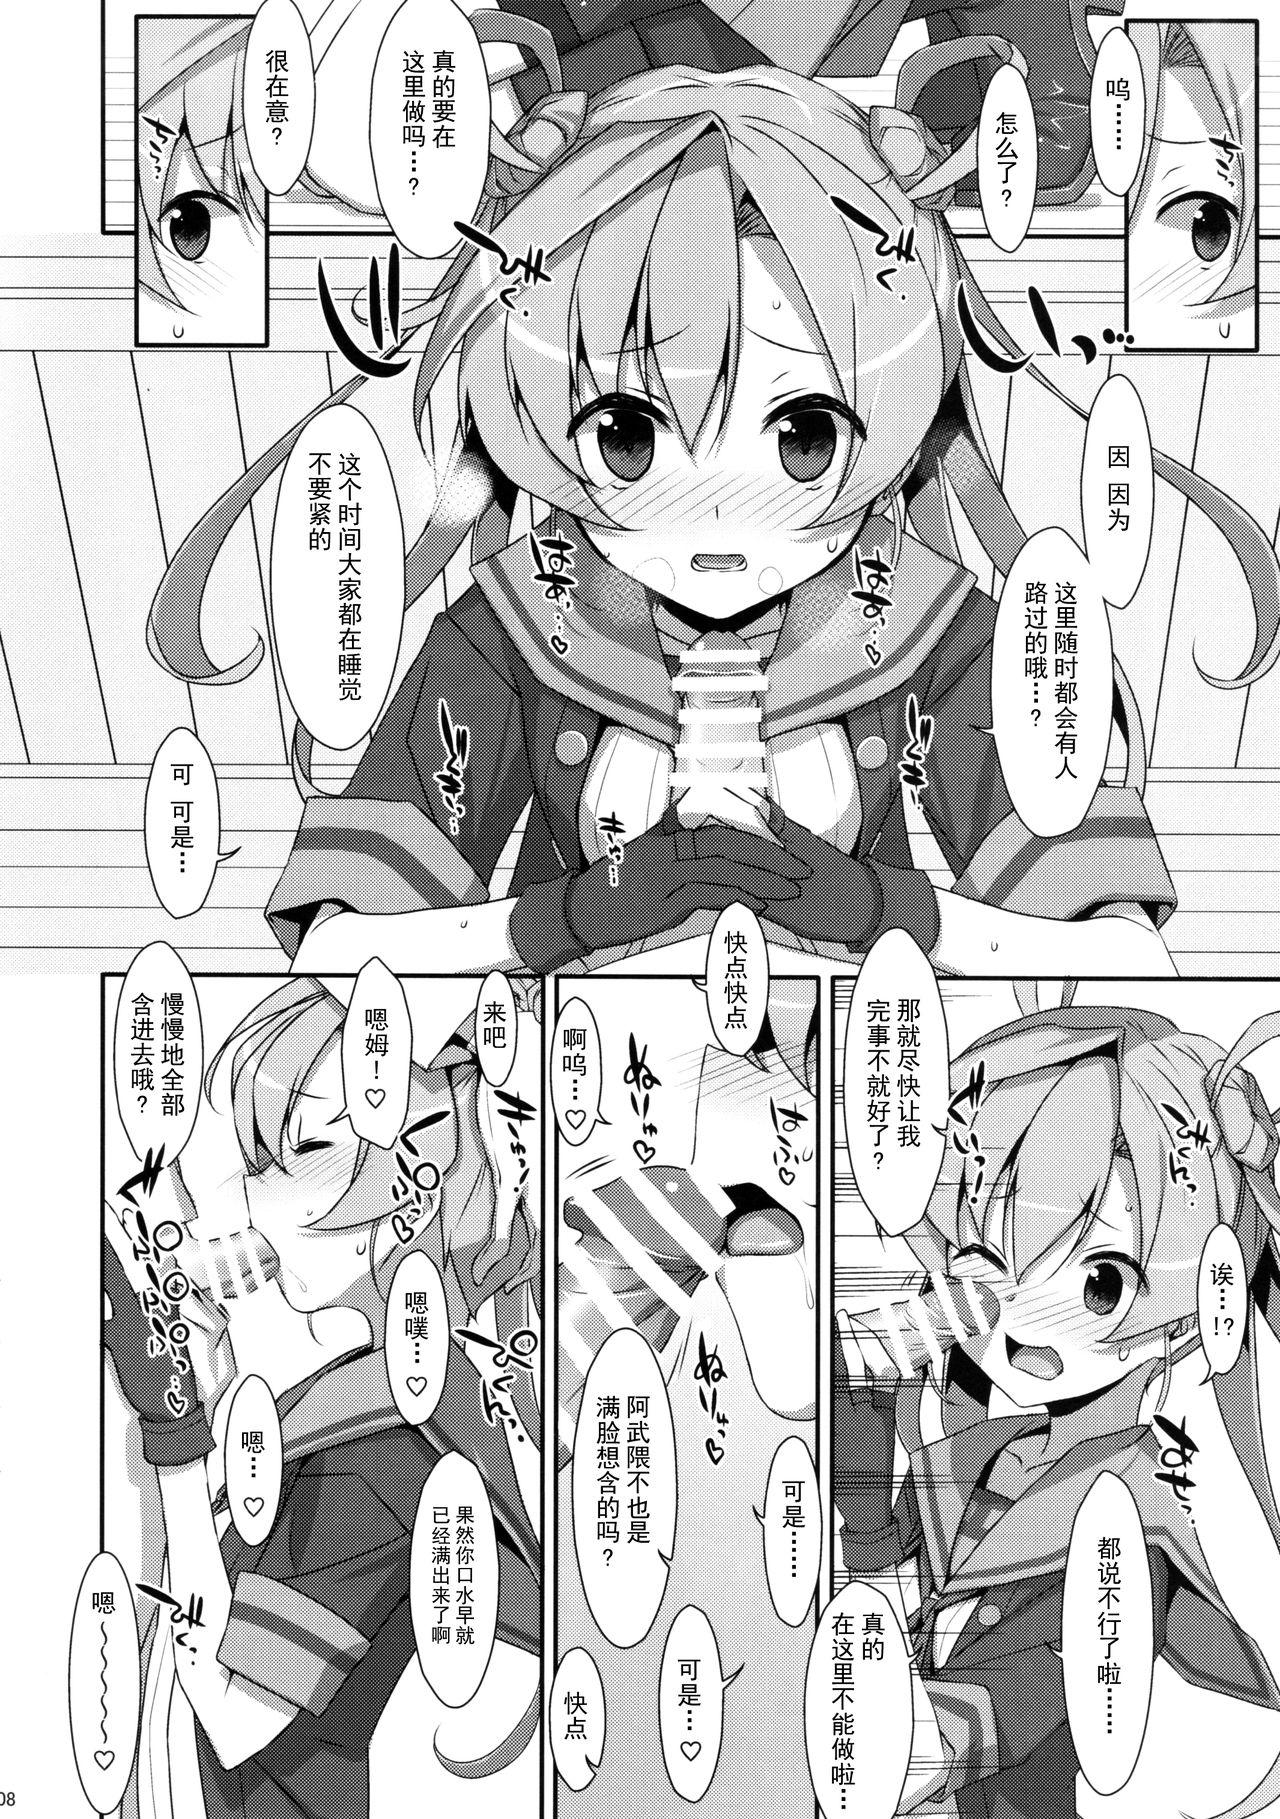 Ametur Porn your mind. - Kantai collection Licking Pussy - Page 8